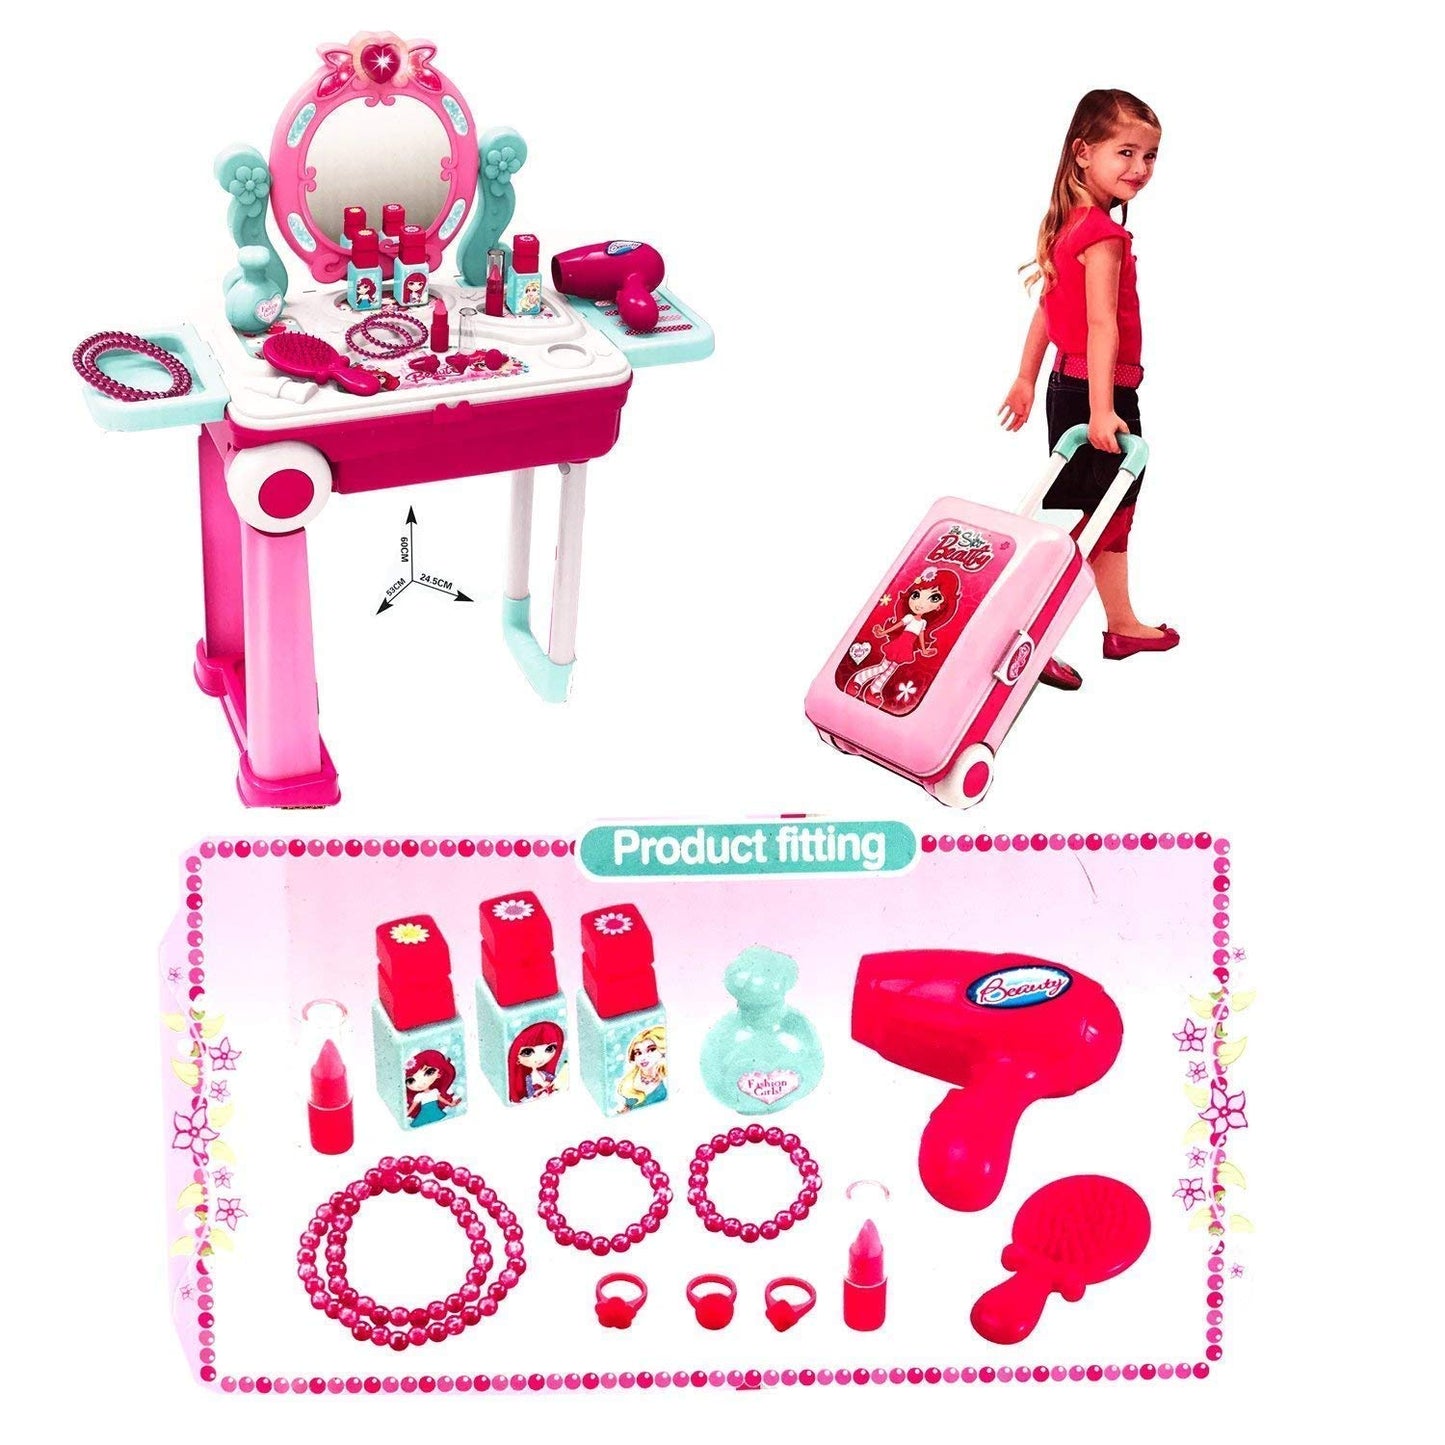 Makeup Kit Set, Make Up Kit, Pretend Play, Role Play Toys, Fashion Beauty Play Set  With Luggage Trolley For Kids